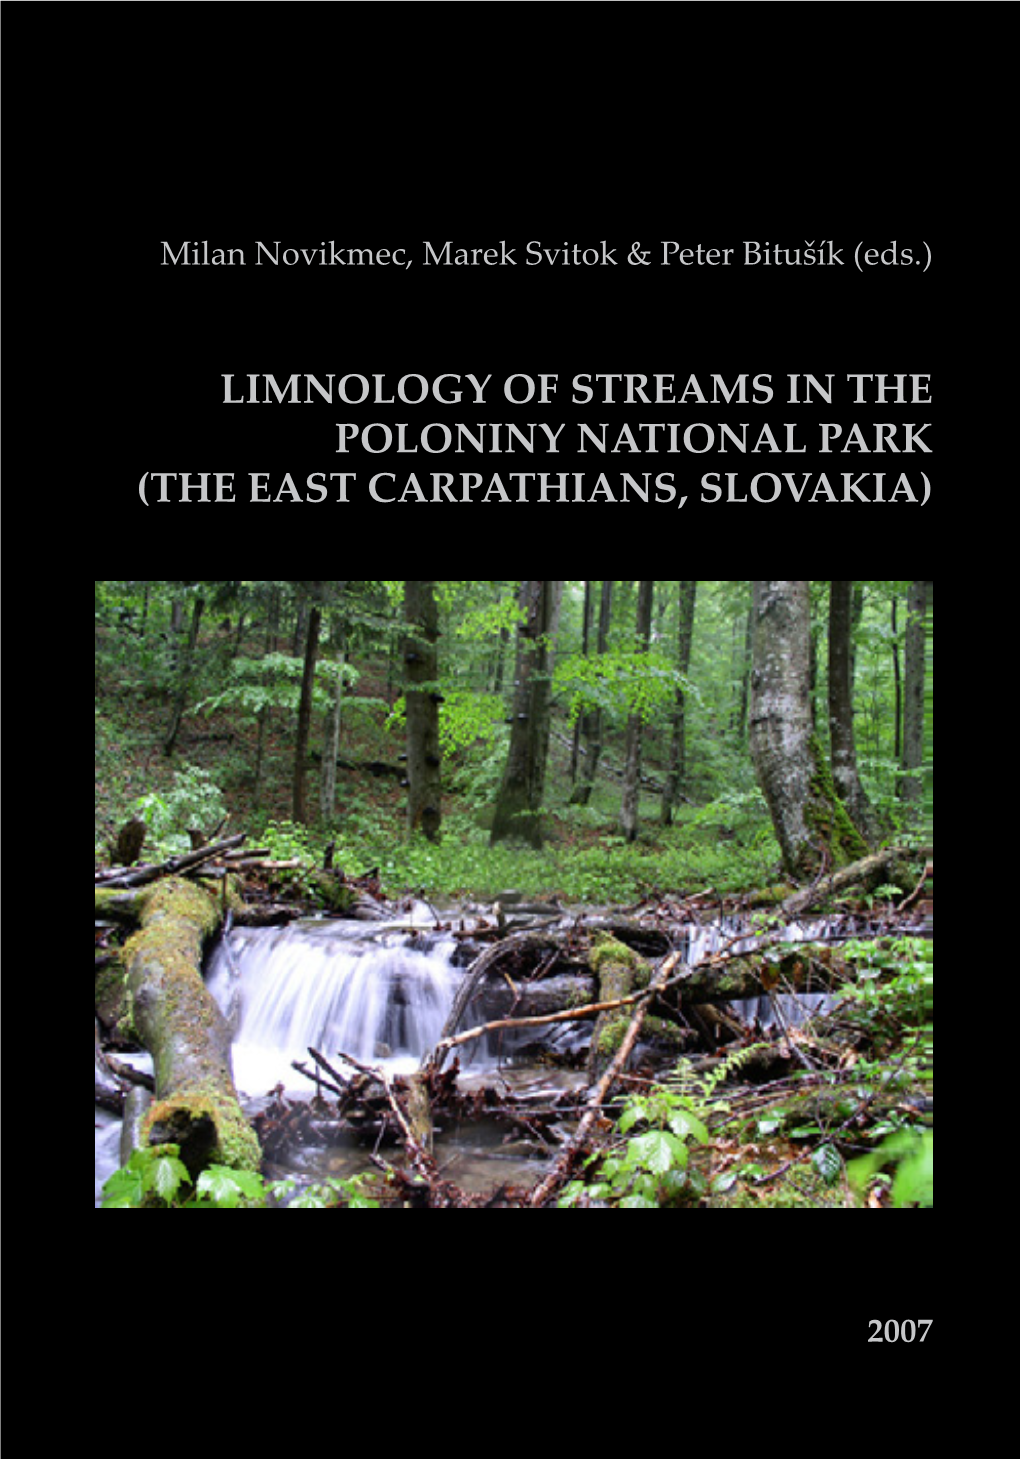 Limnology of Streams in the Poloniny National Park (The East Carpathians, Slovakia)